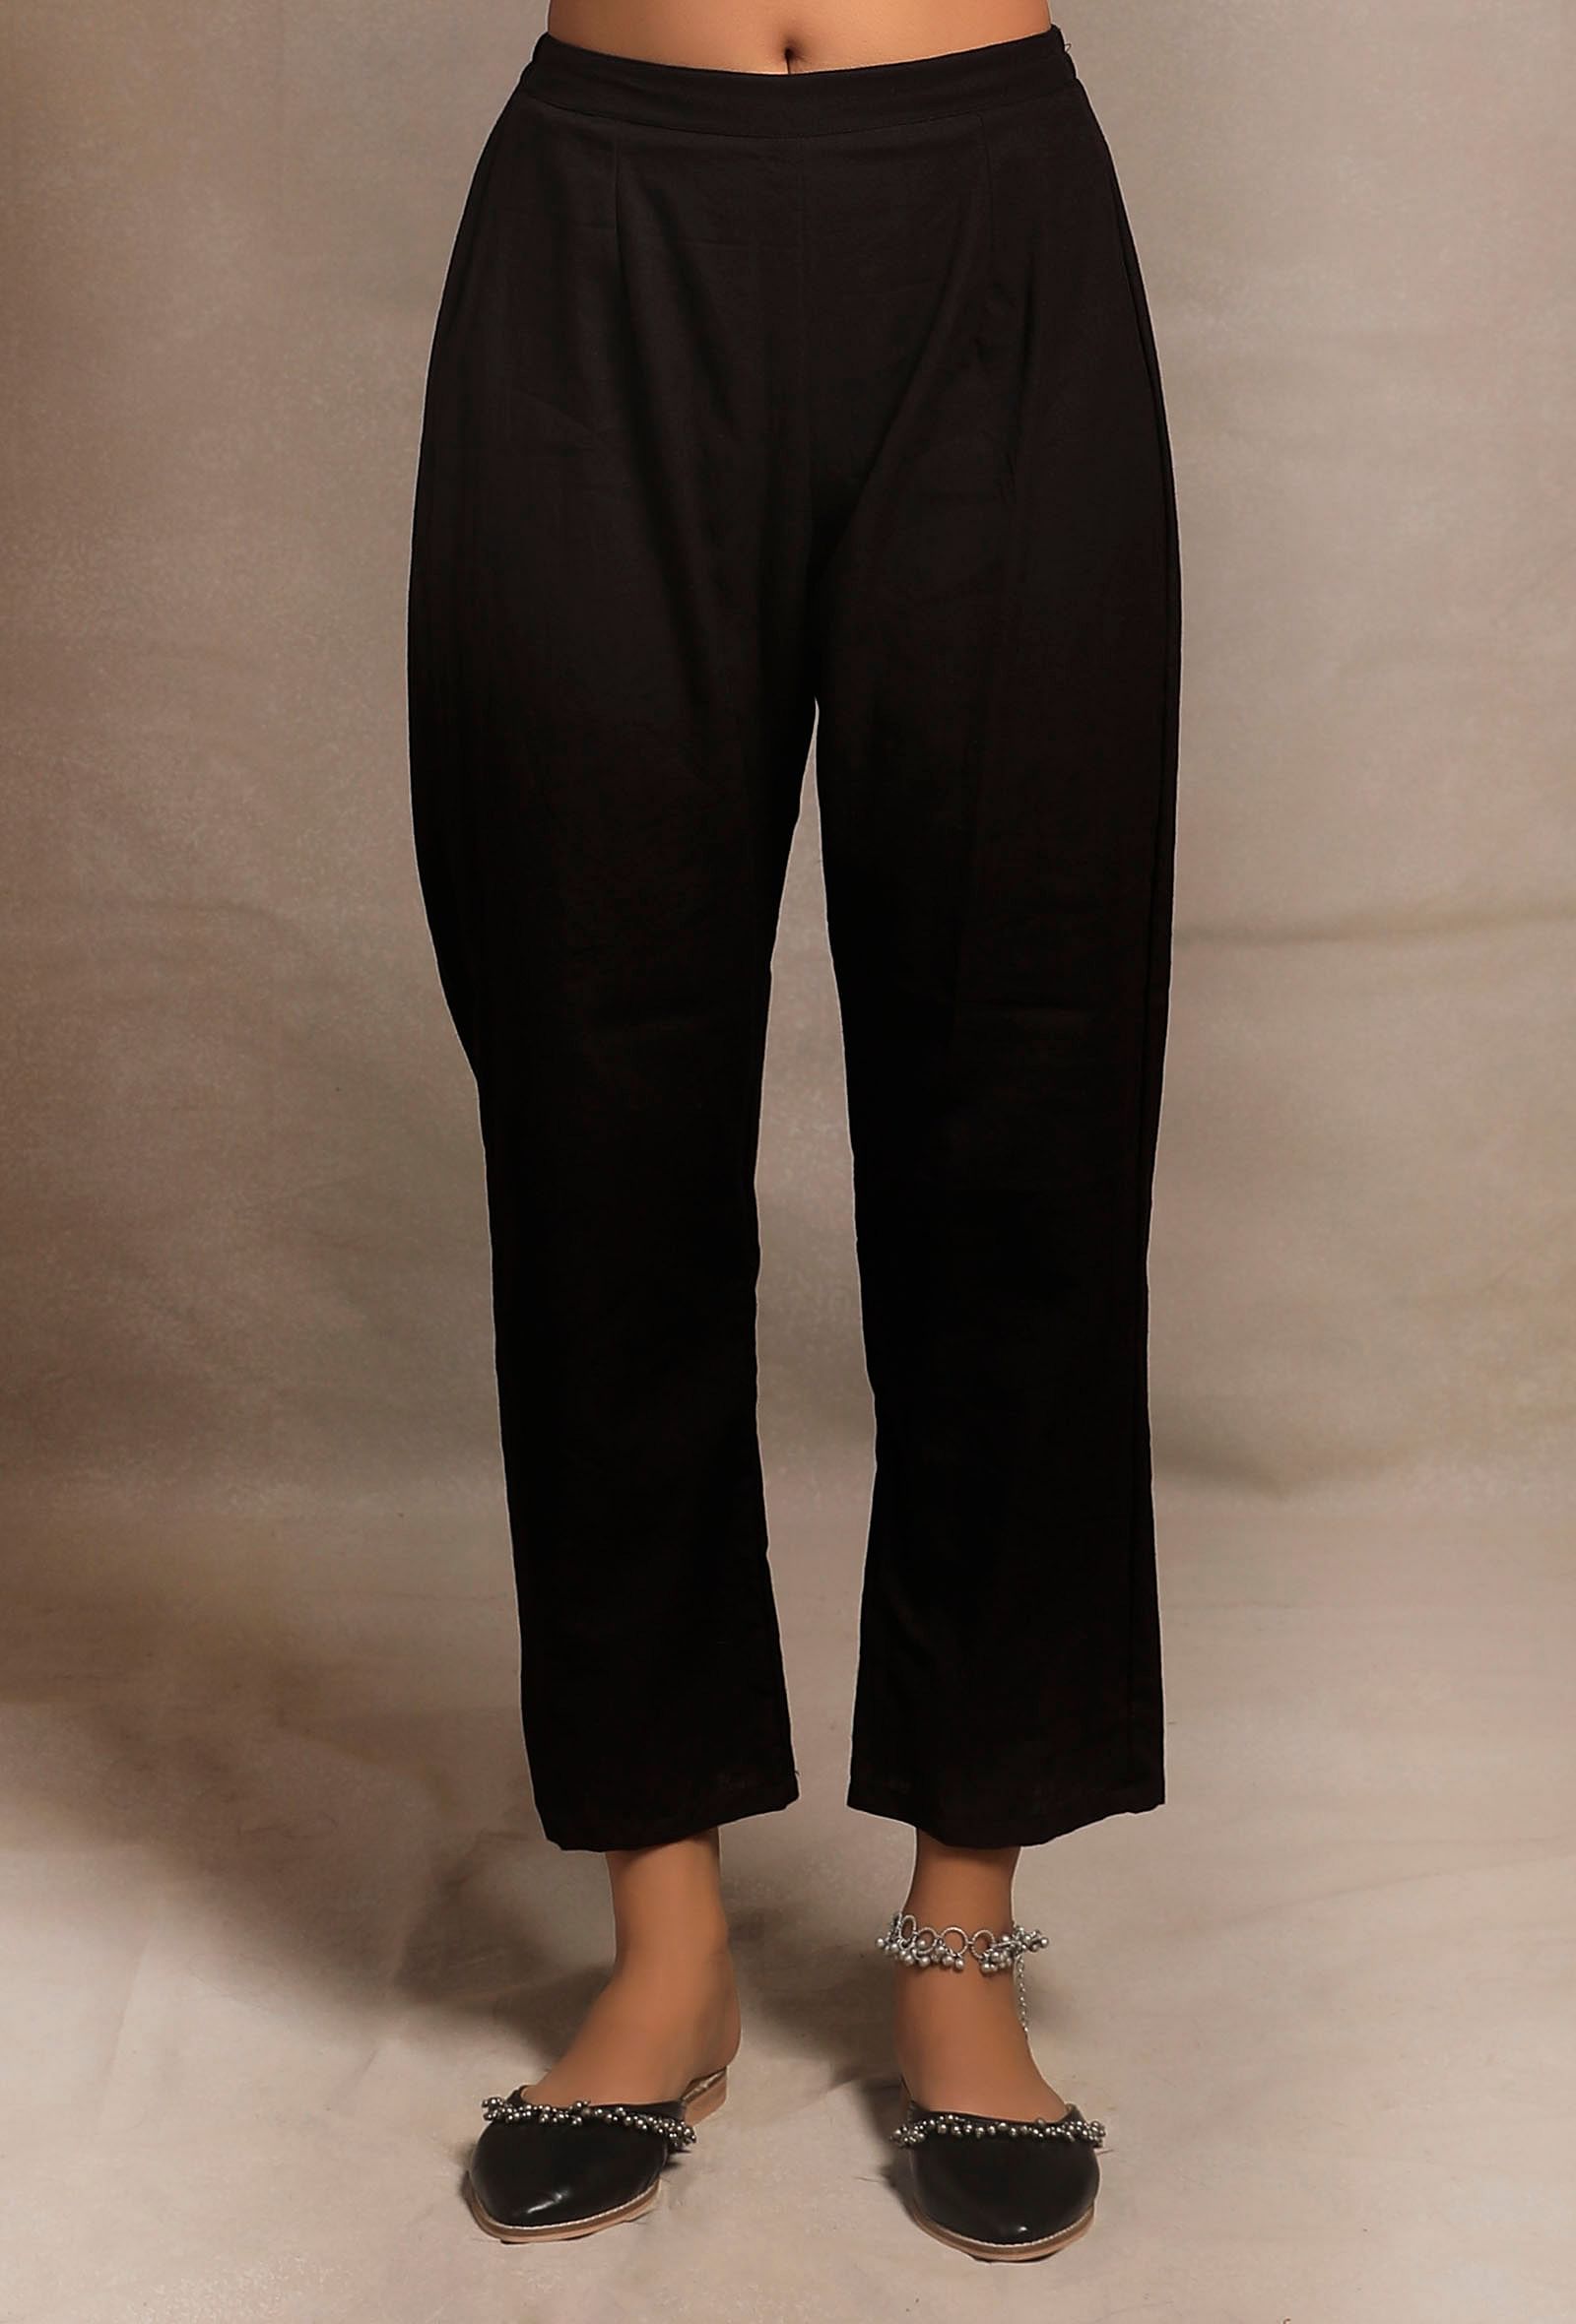 Black Straight Fit Cotton Pants with Embroidery at bottom